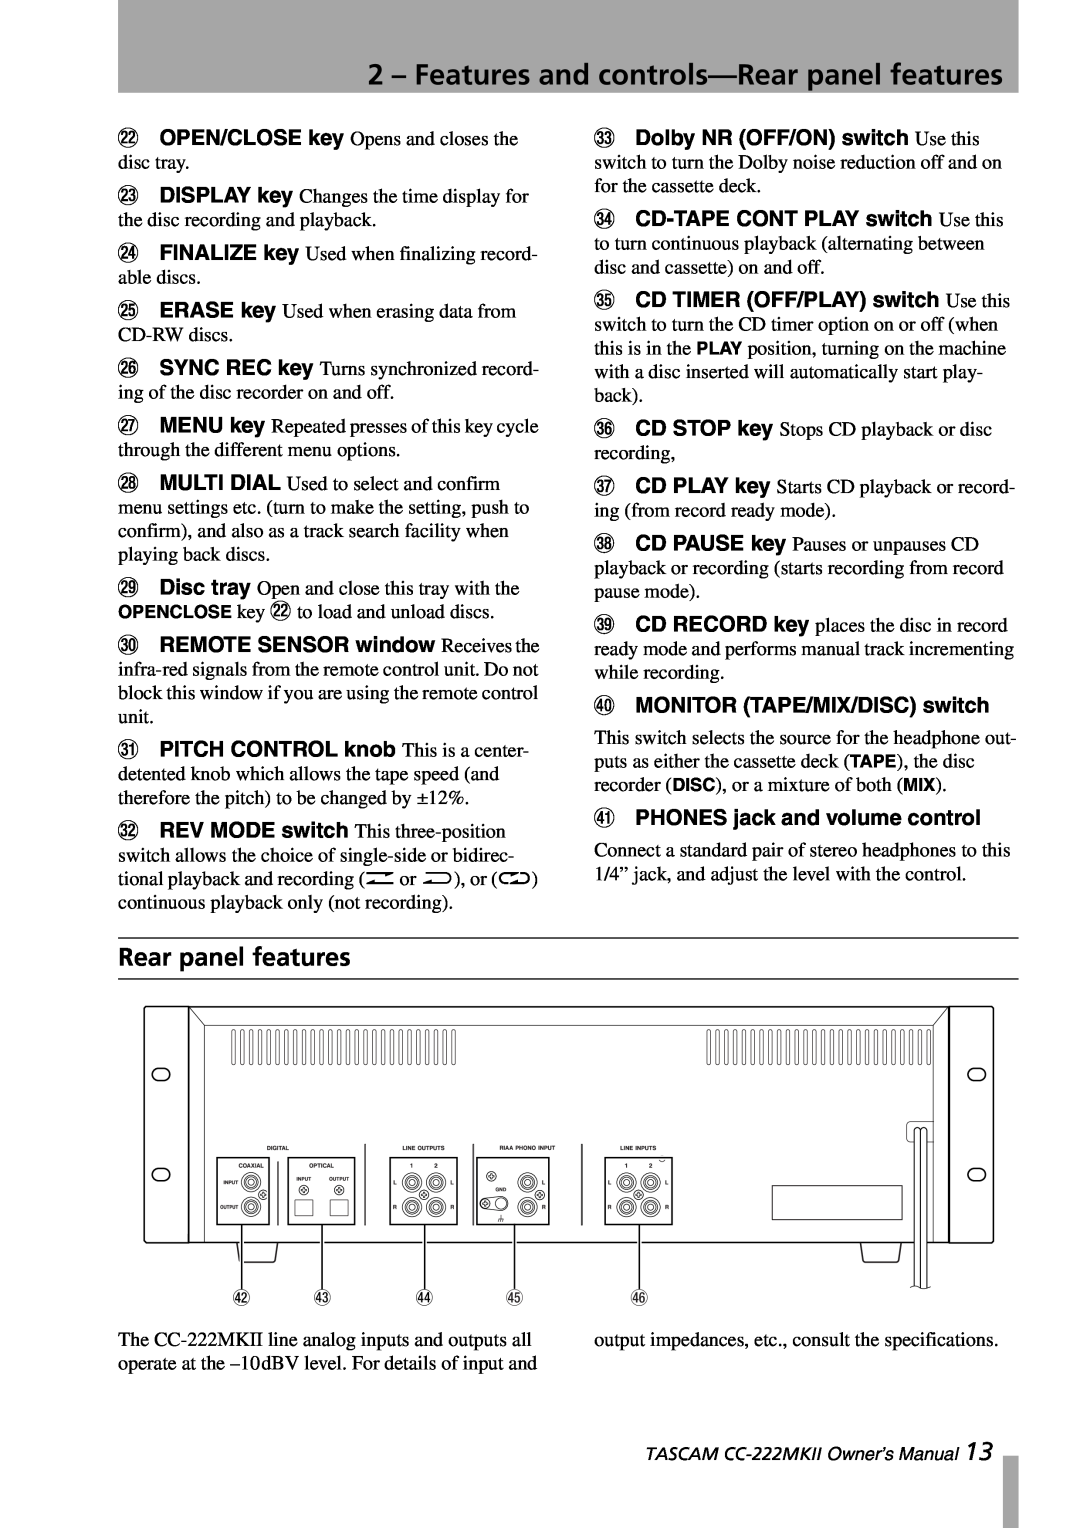 Tascam CC-222MKII owner manual Features and controls-Rearpanel features, Rear panel features, eMONITOR TAPE/MIX/DISC switch 